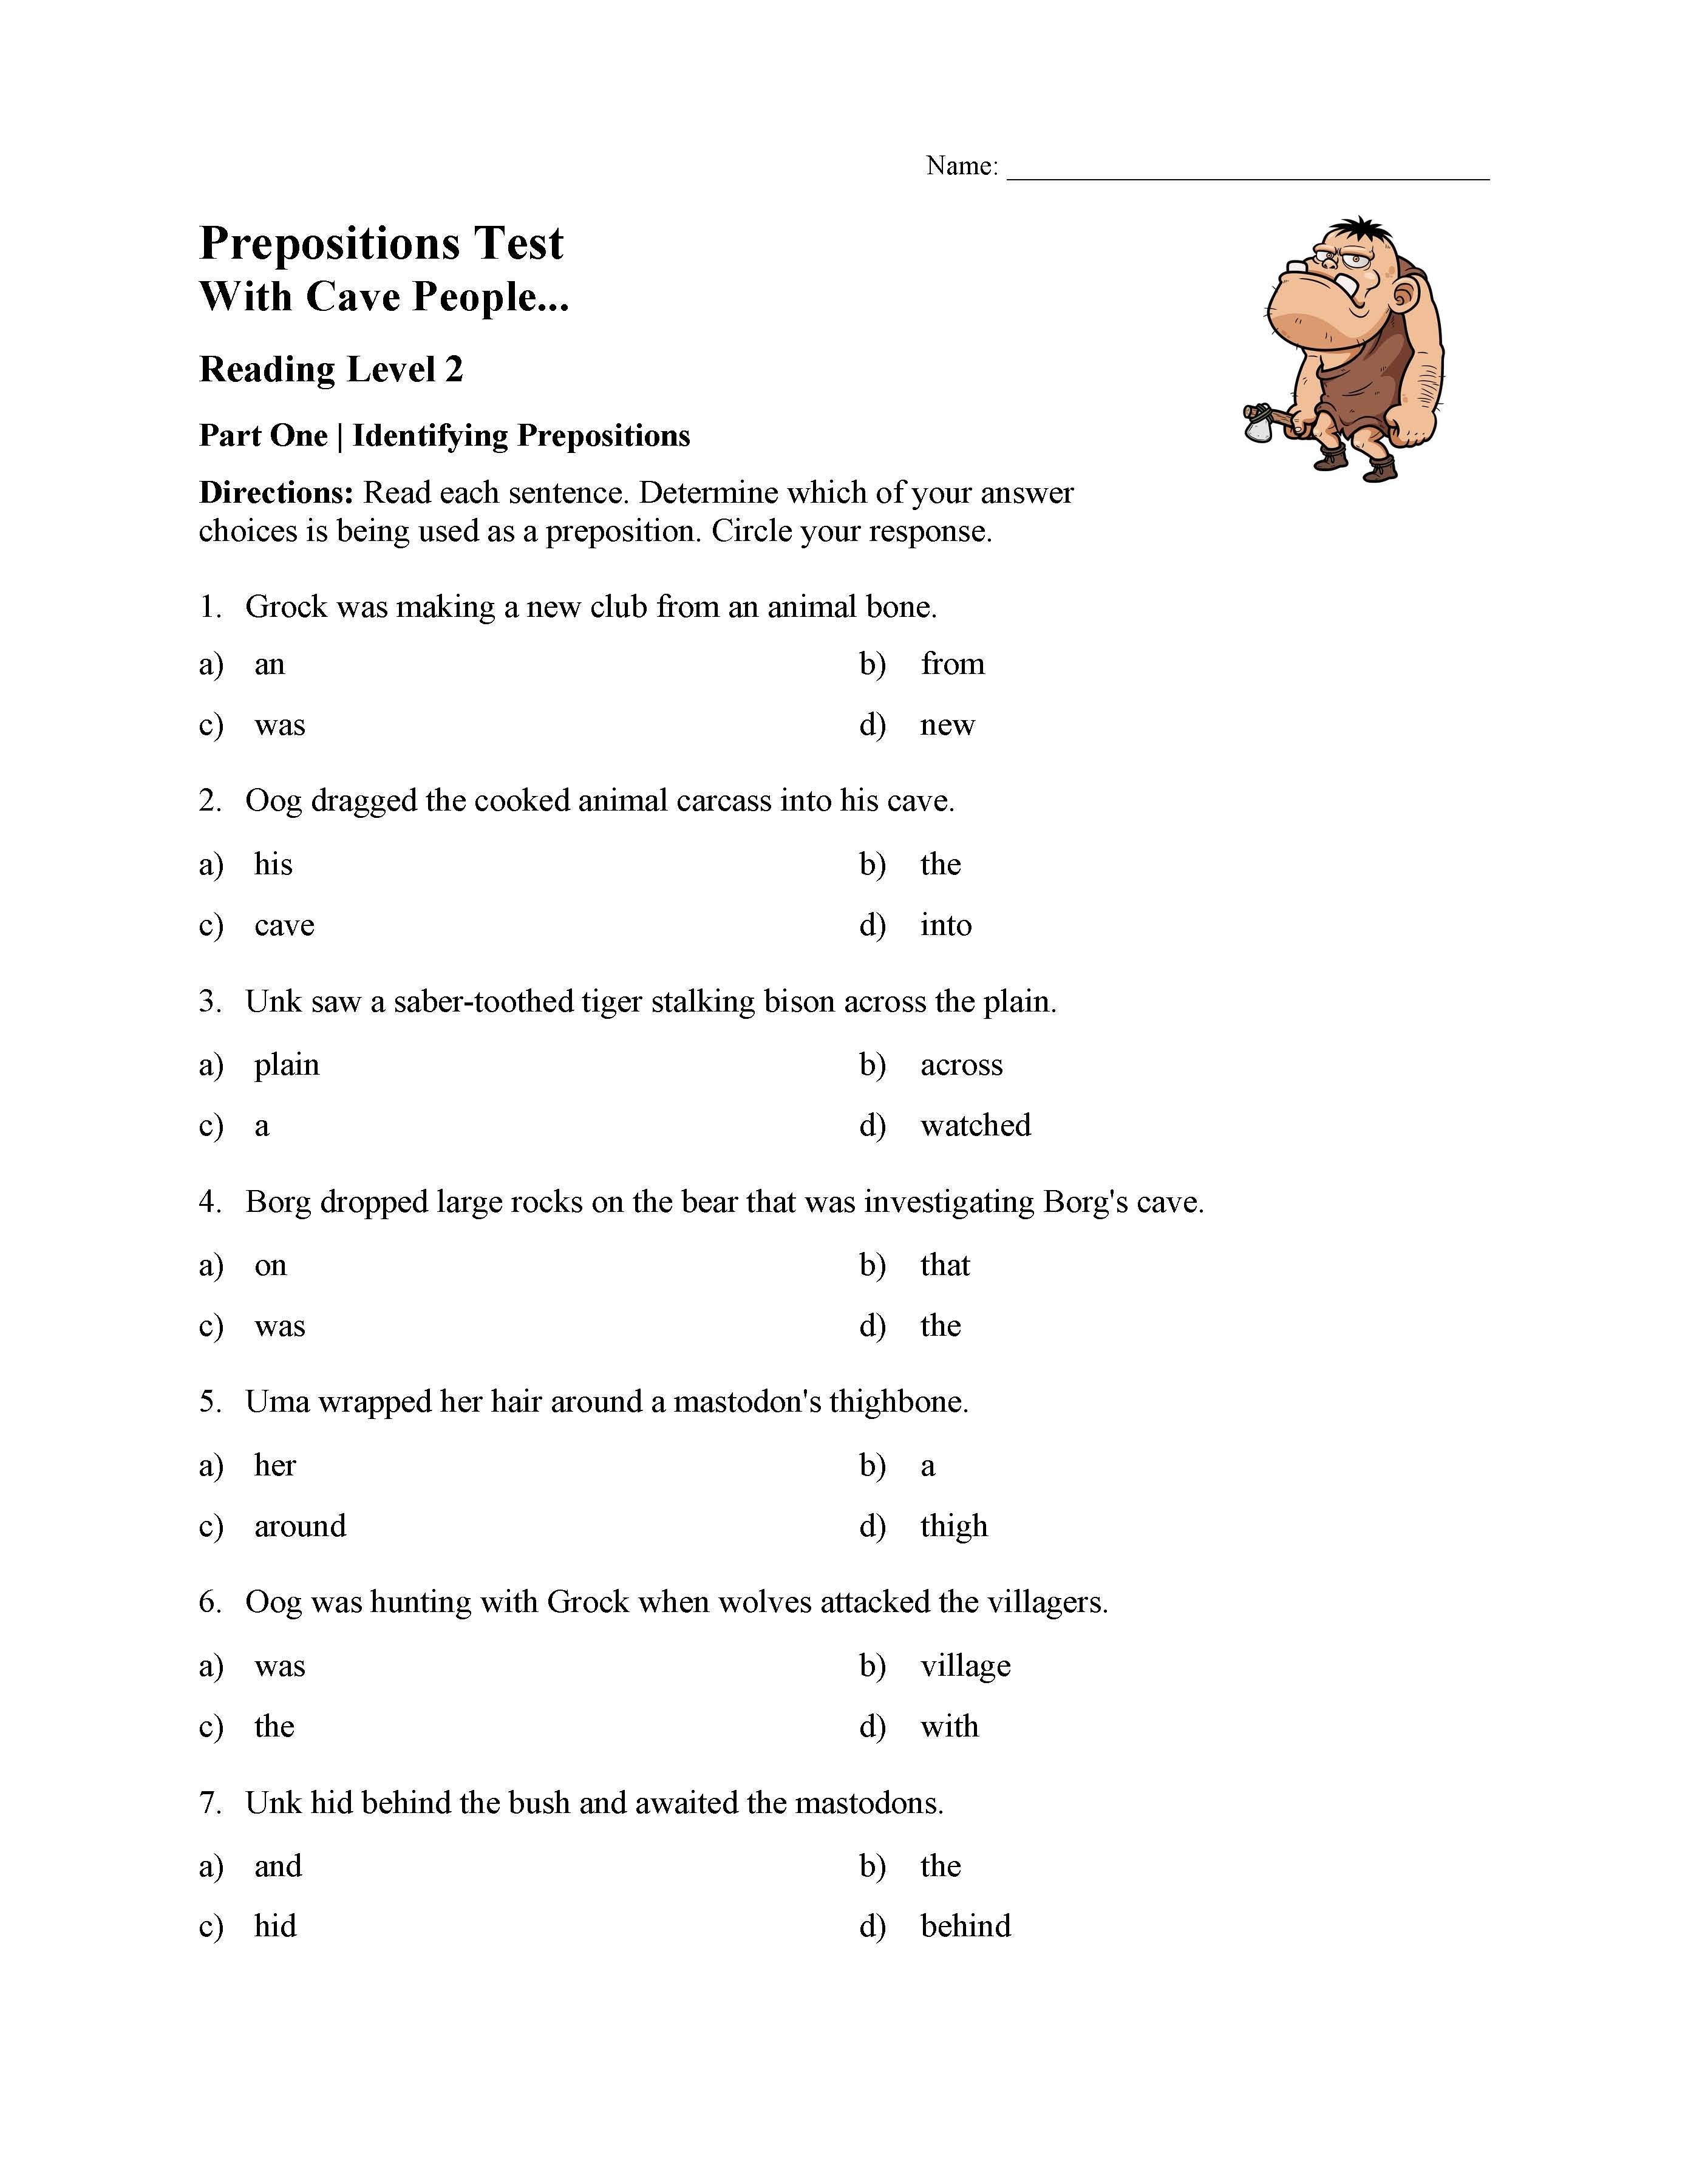 This is a preview image of Prepositions Test | With Cave People. Click on it to enlarge it or view the source file.